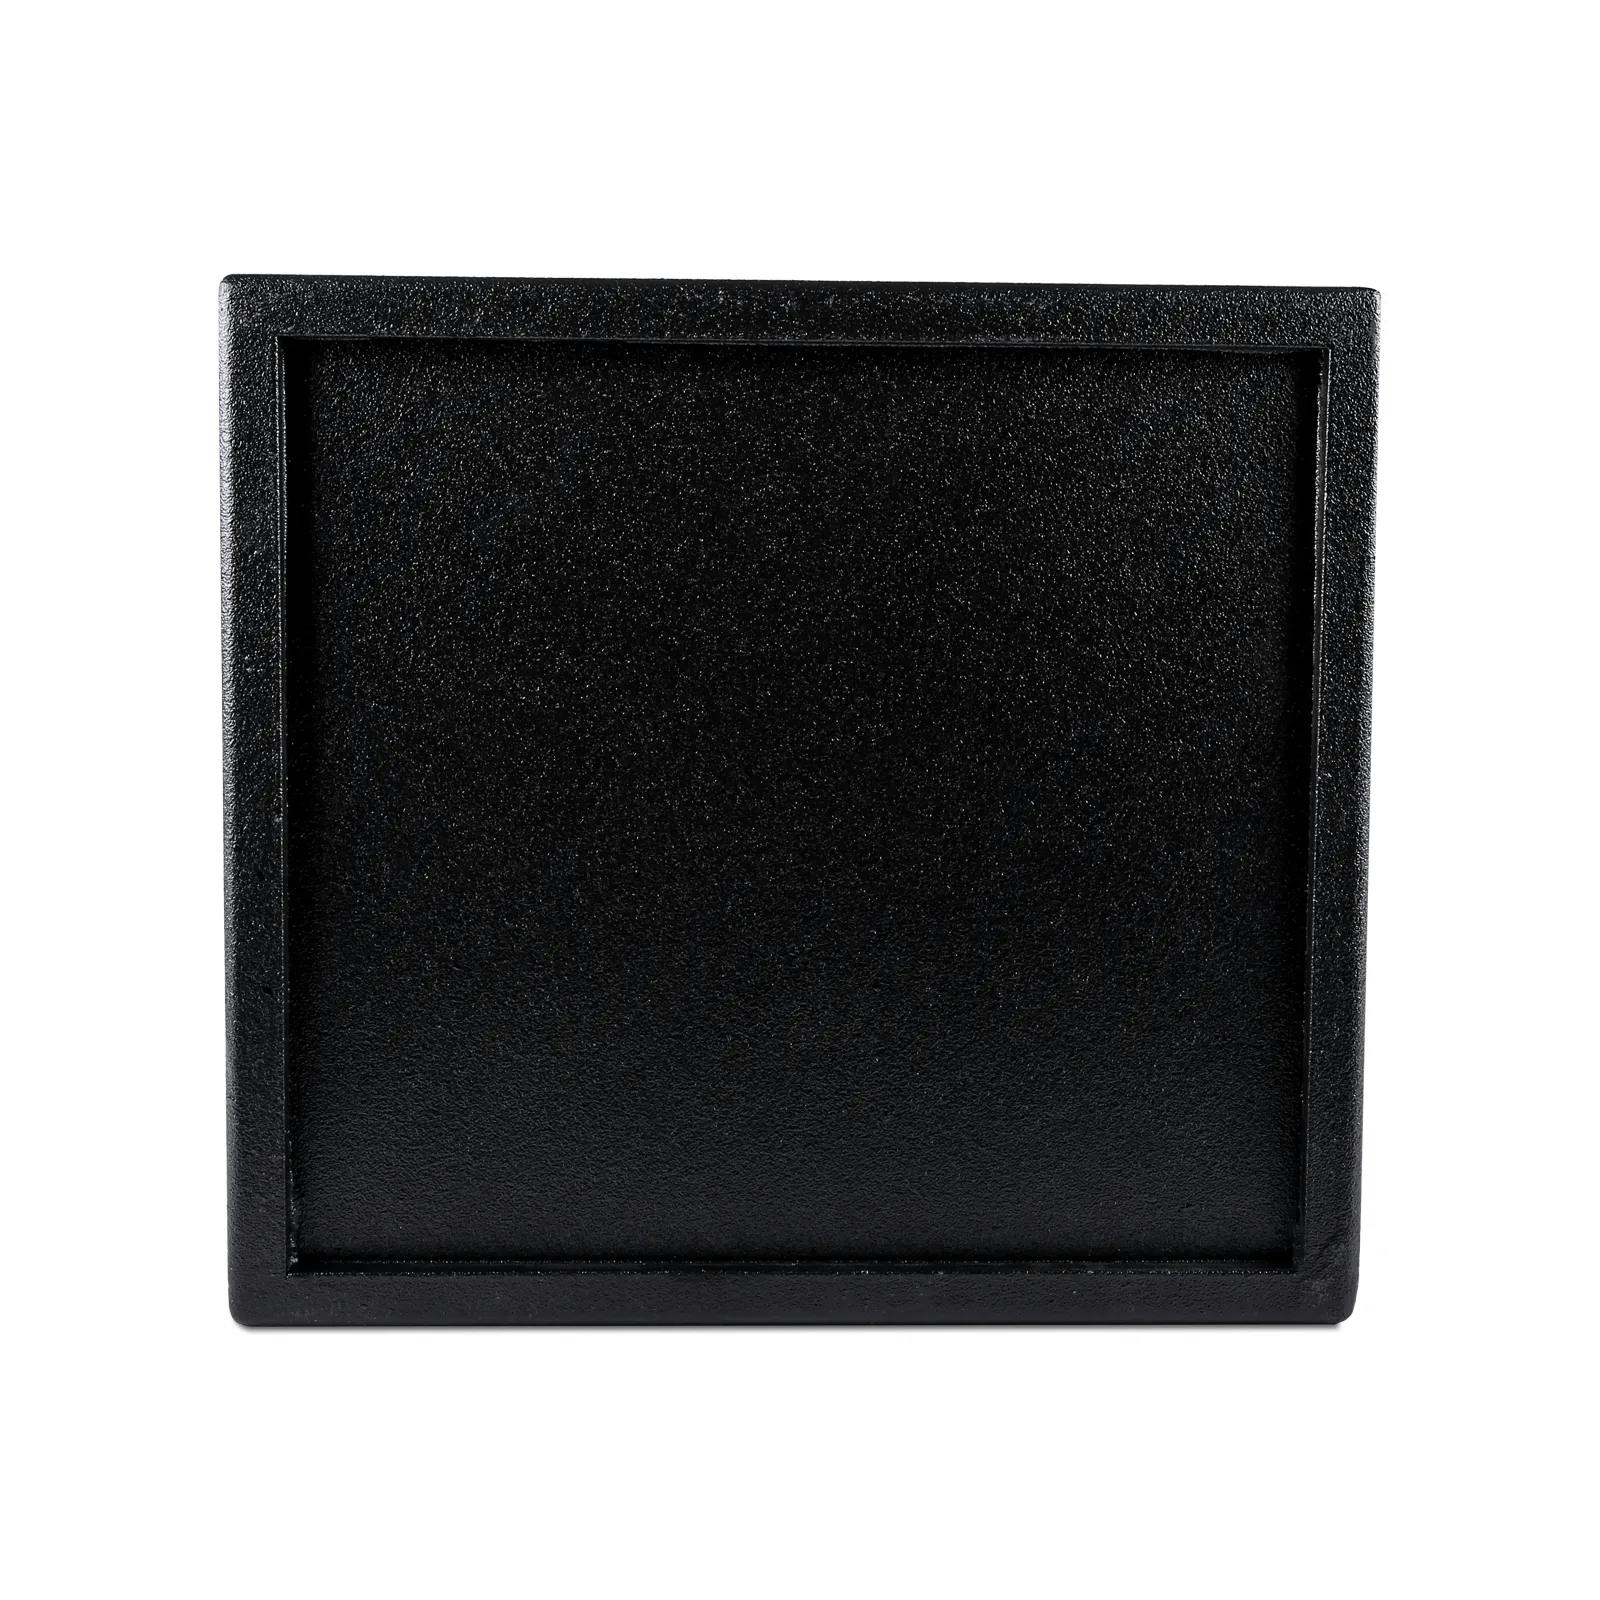 Featured Product Photo 5 for Dual 10" Armor Coated Ported Subwoofer Enclosure